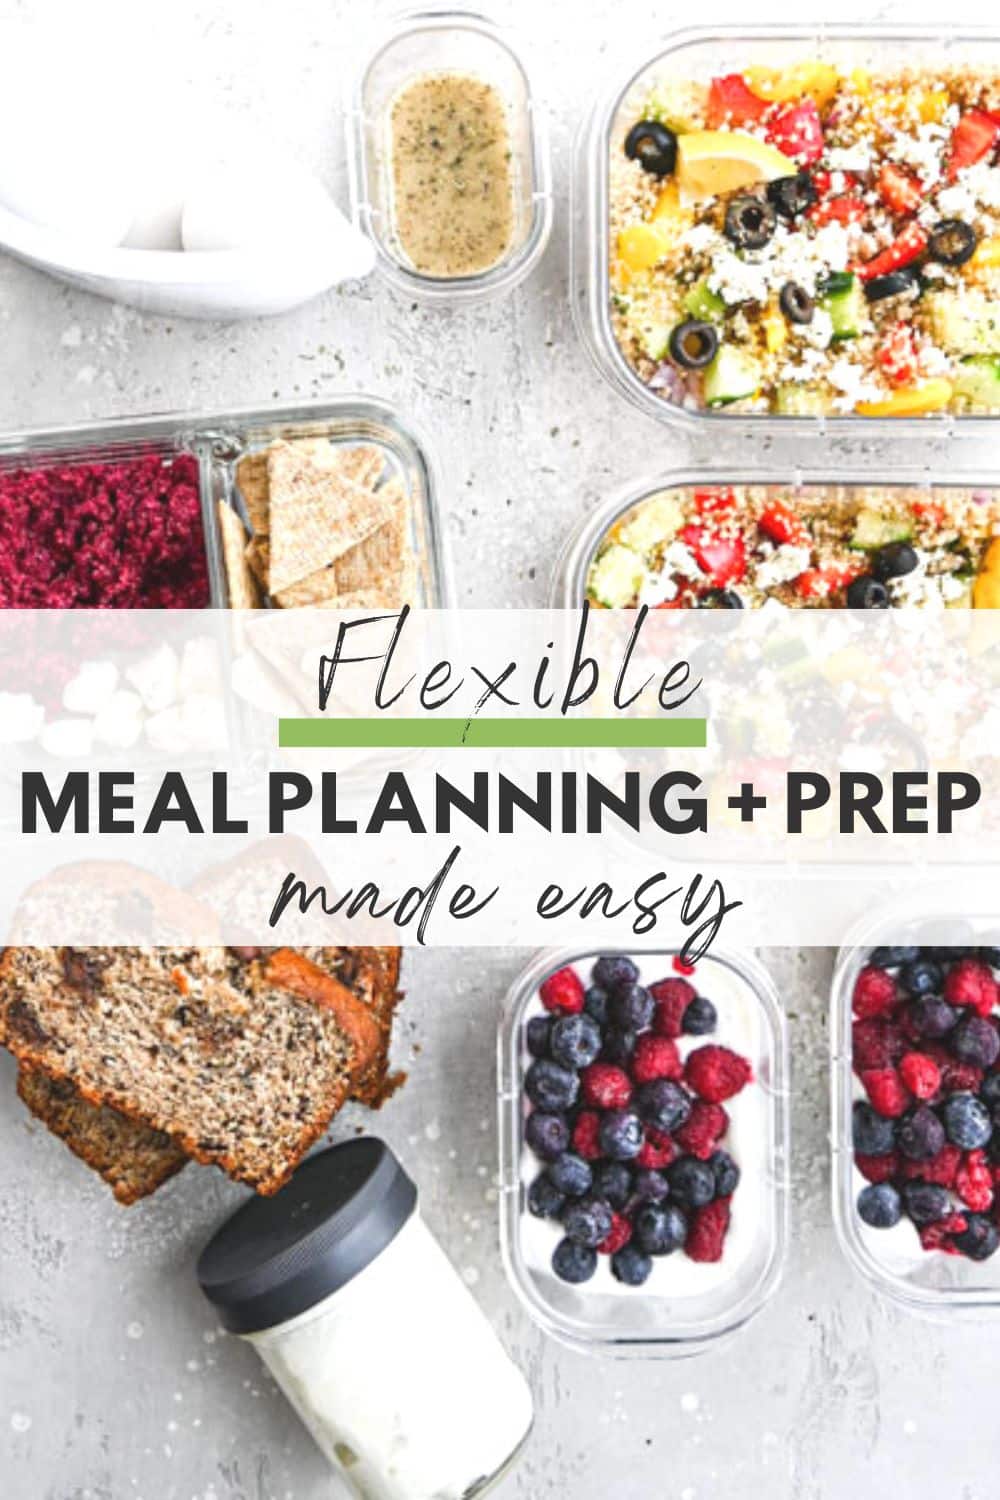 How to do Flexible Meal Planning and Prep {no stress, no cooking all Sunday!}